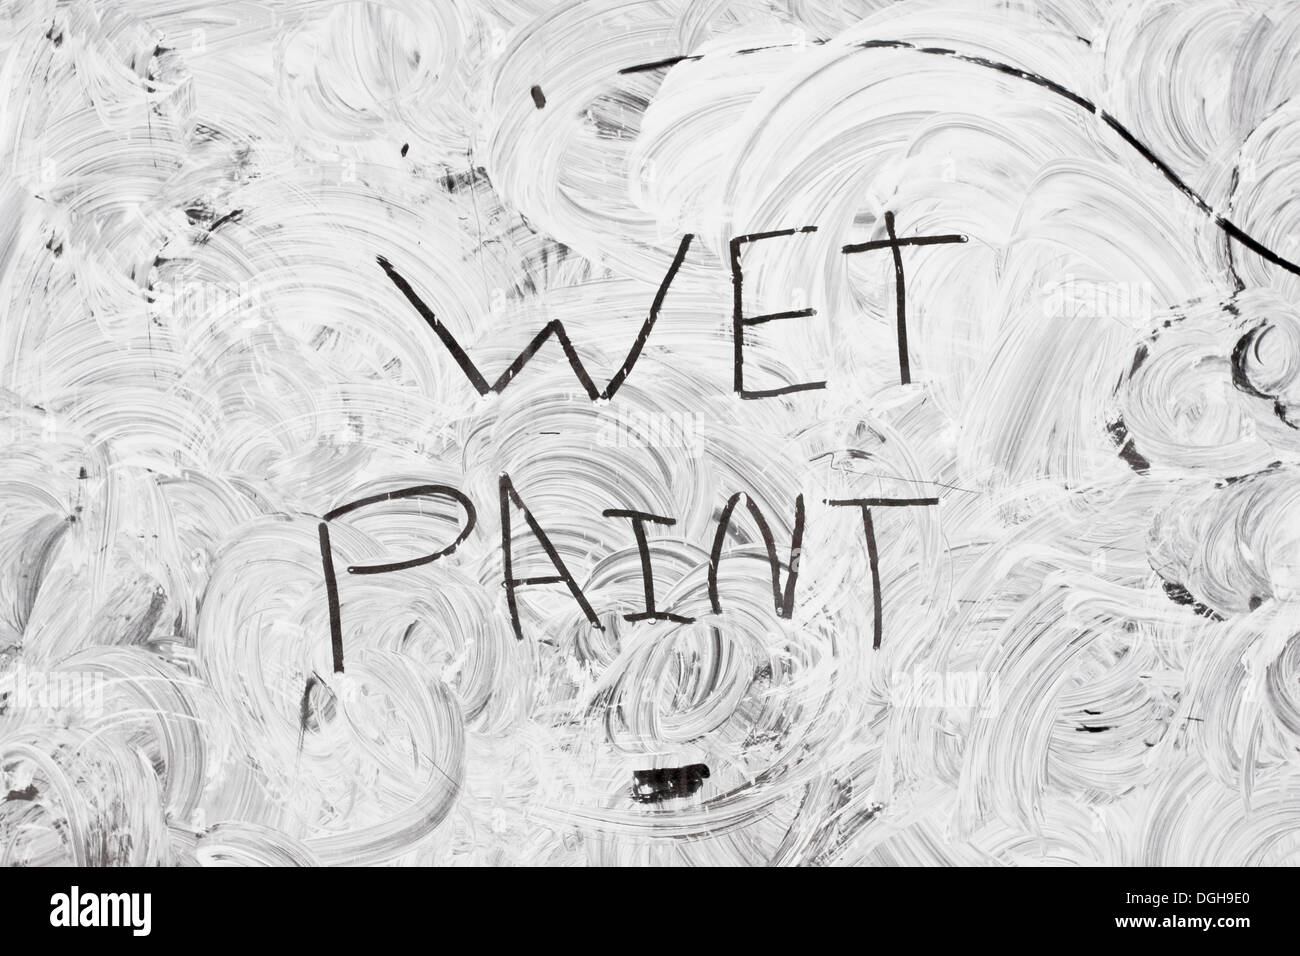 Wet white paint on a glass window Stock Photo